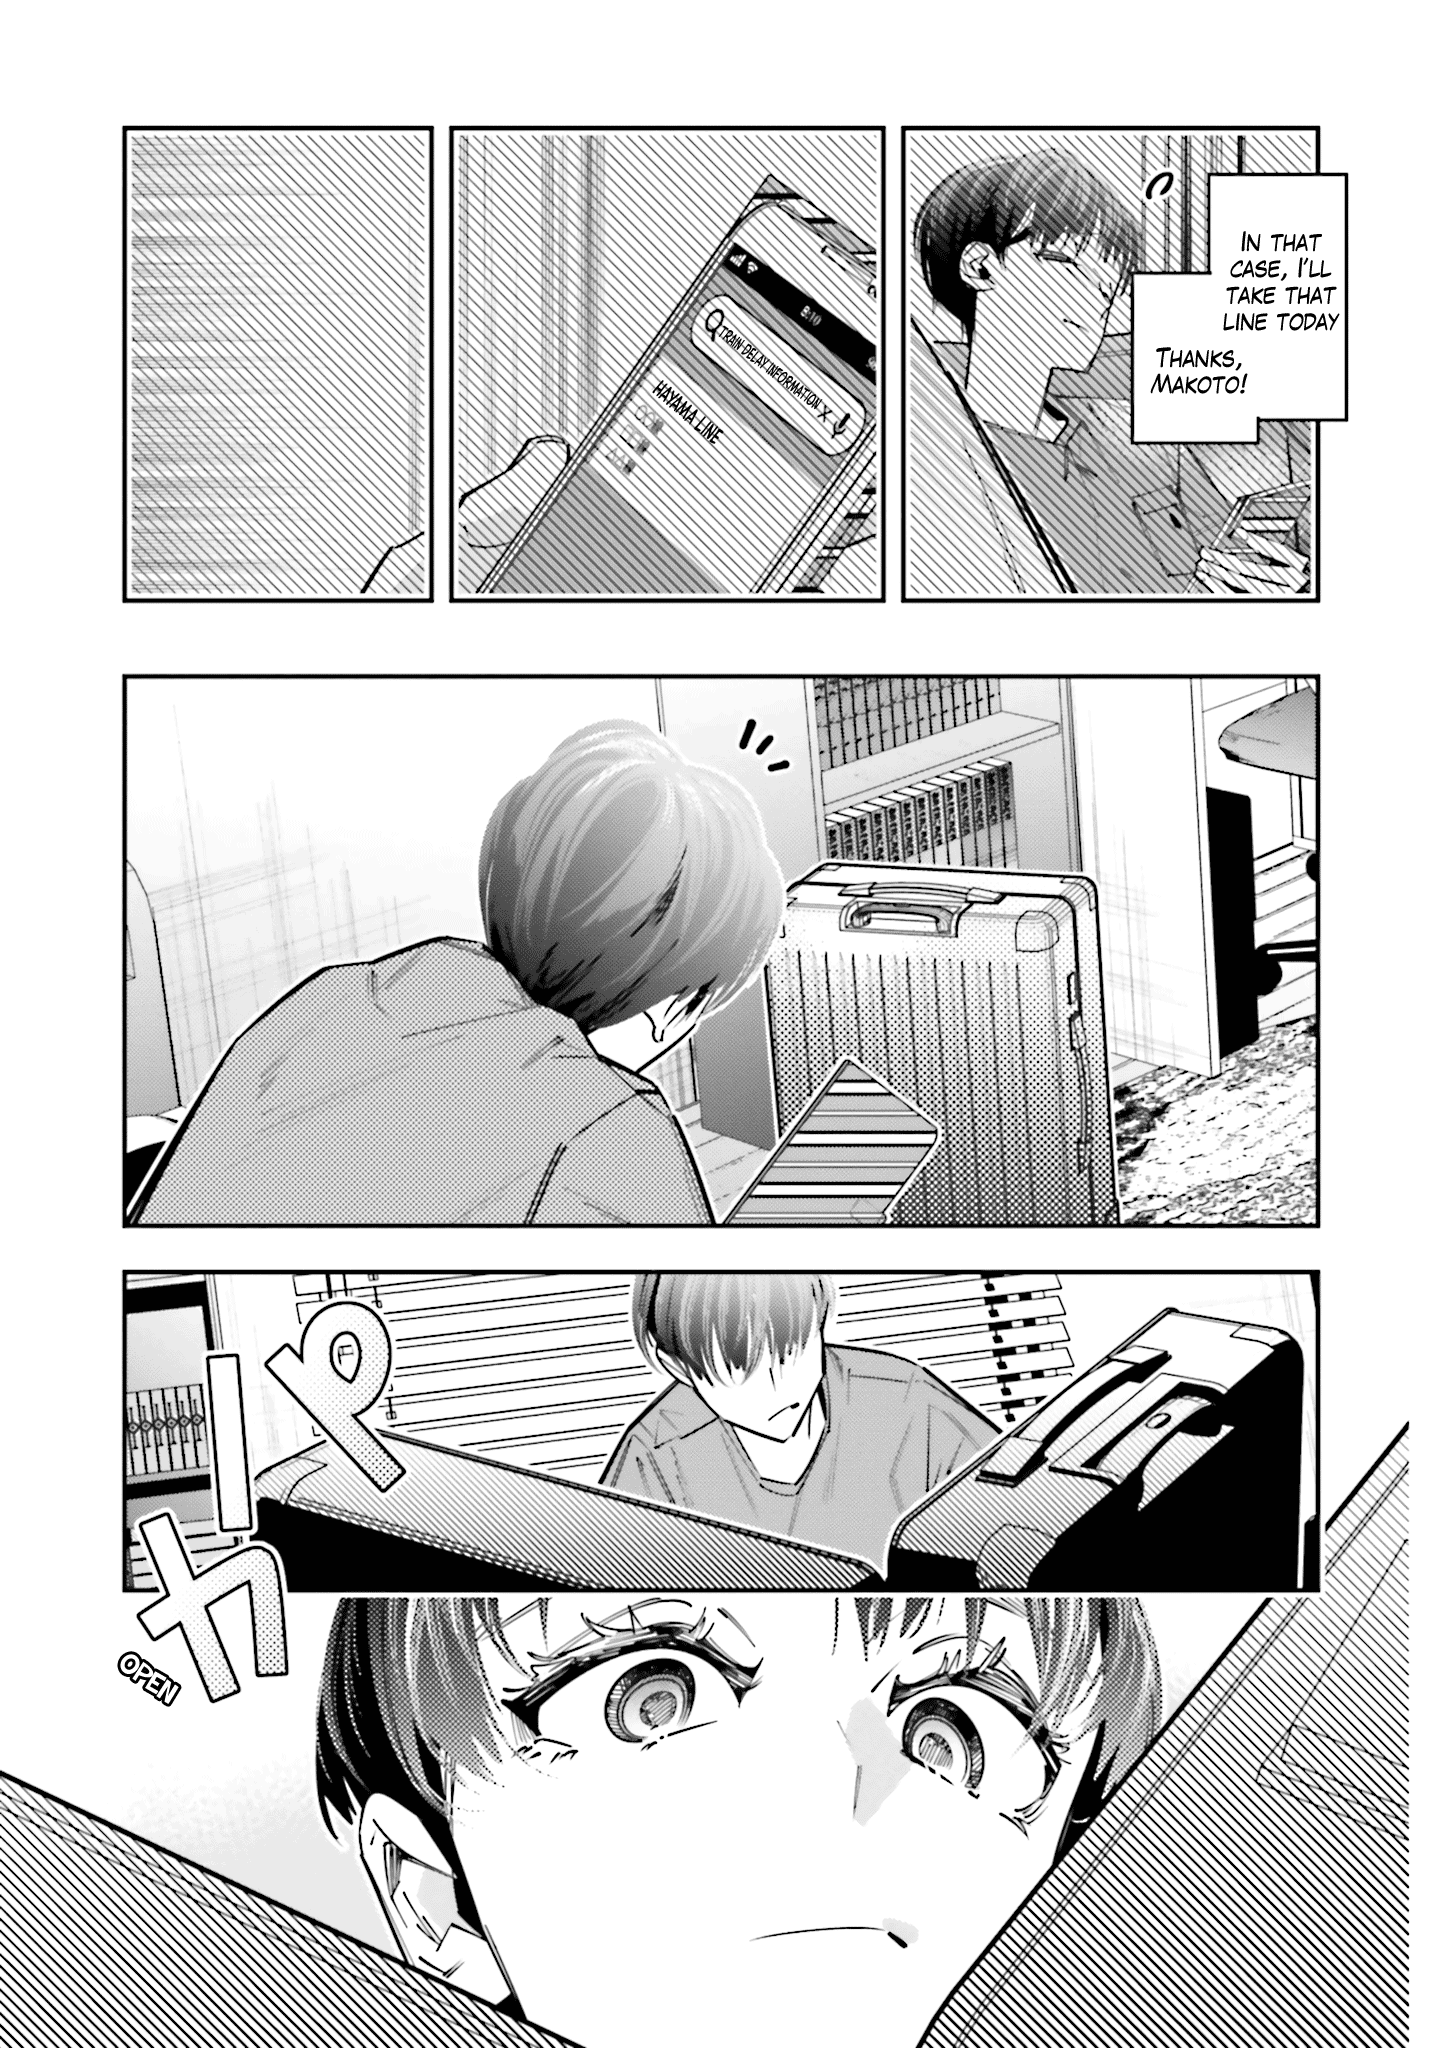 I Reincarnated As The Little Sister Of A Death Game Manga's Murder Mastermind And Failed Chapter 12 #21